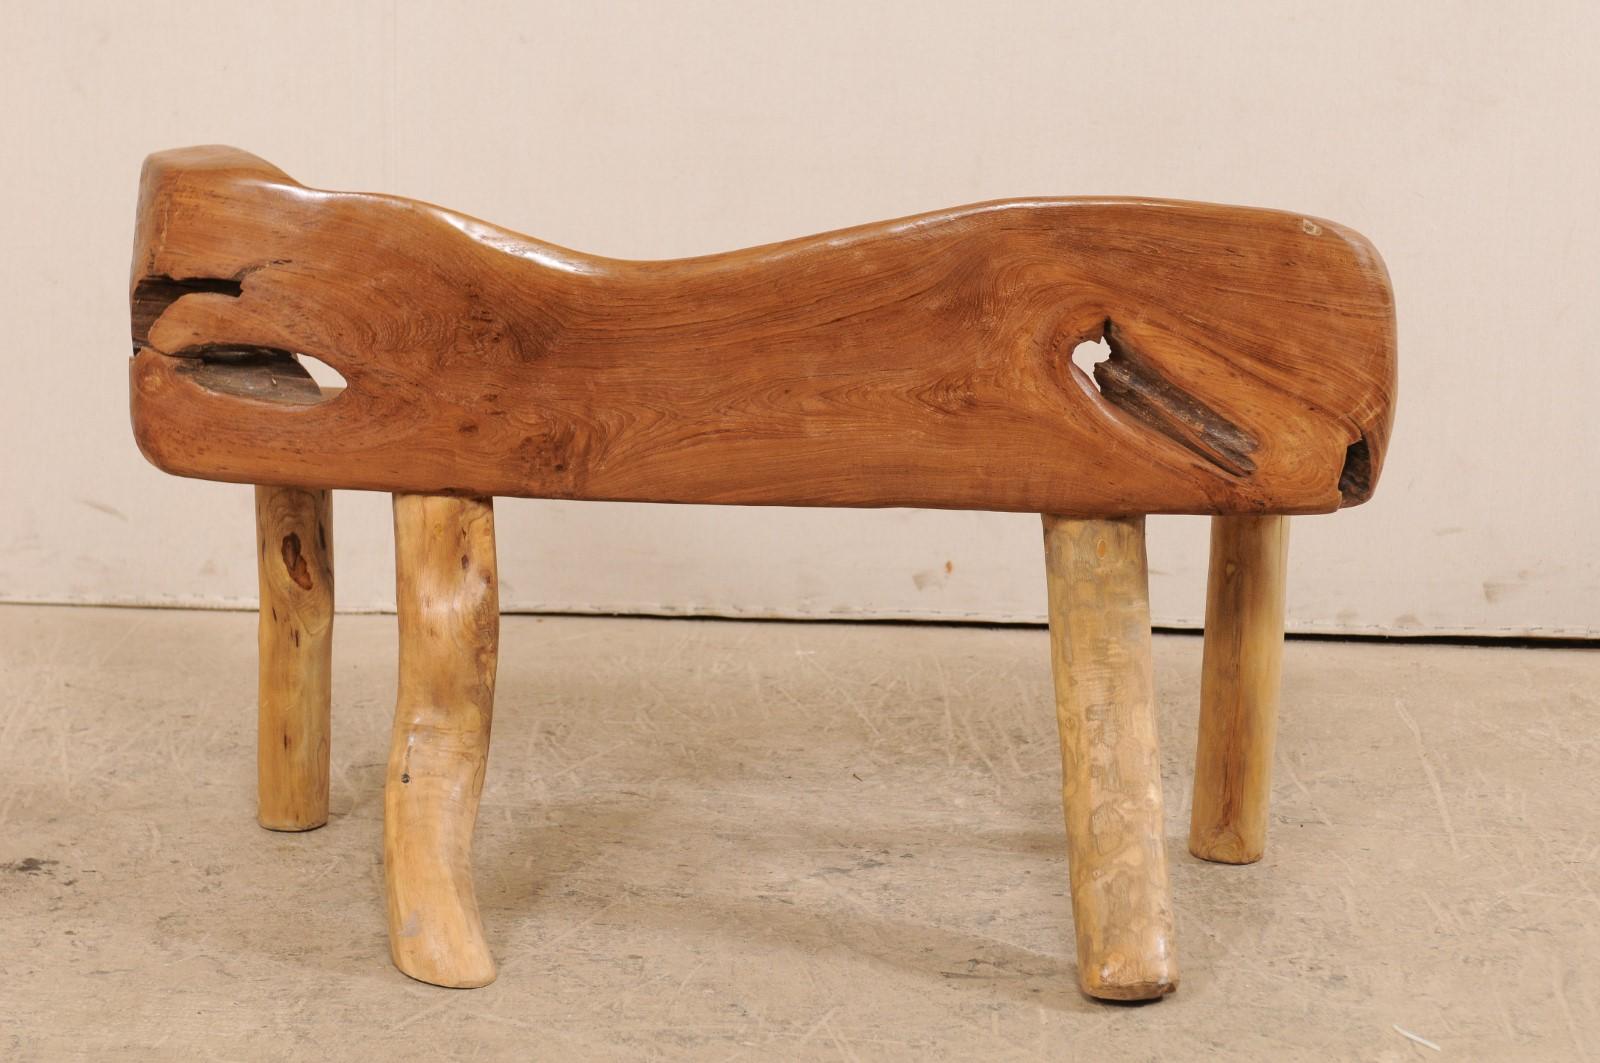 Carved Petite Sized Natural Teak Wood Bench with Live Edge